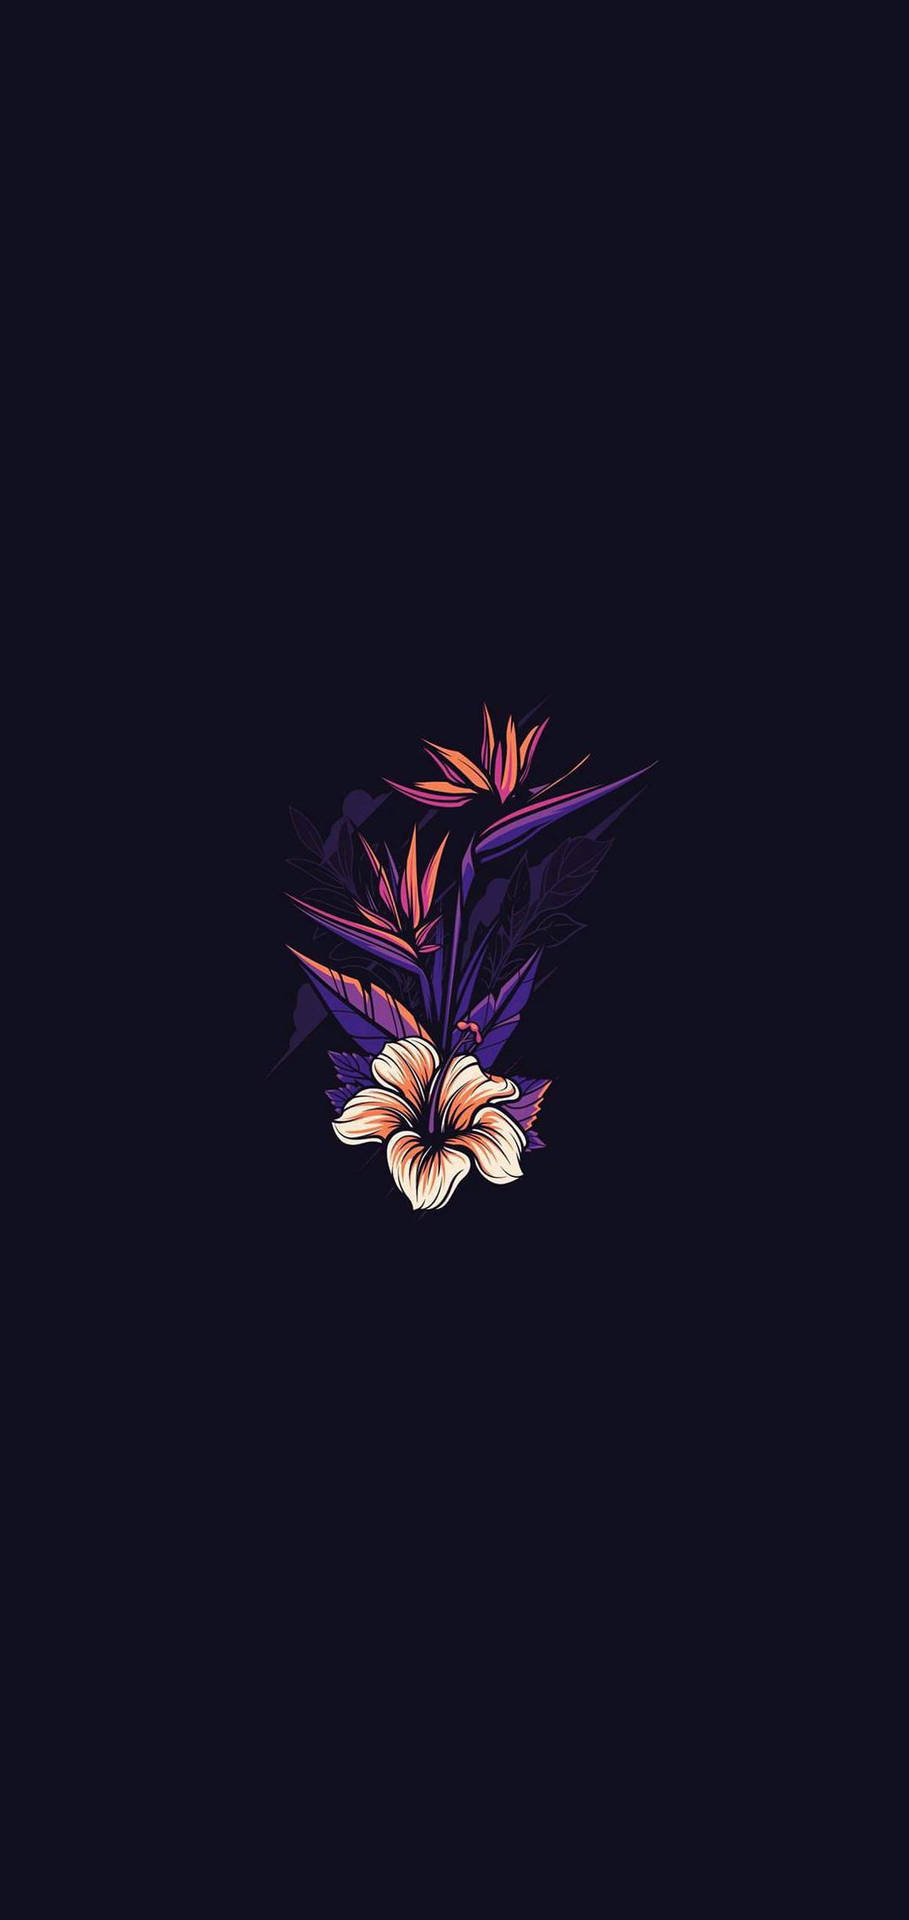 Black Amoled With Hibiscus Flower Wallpaper